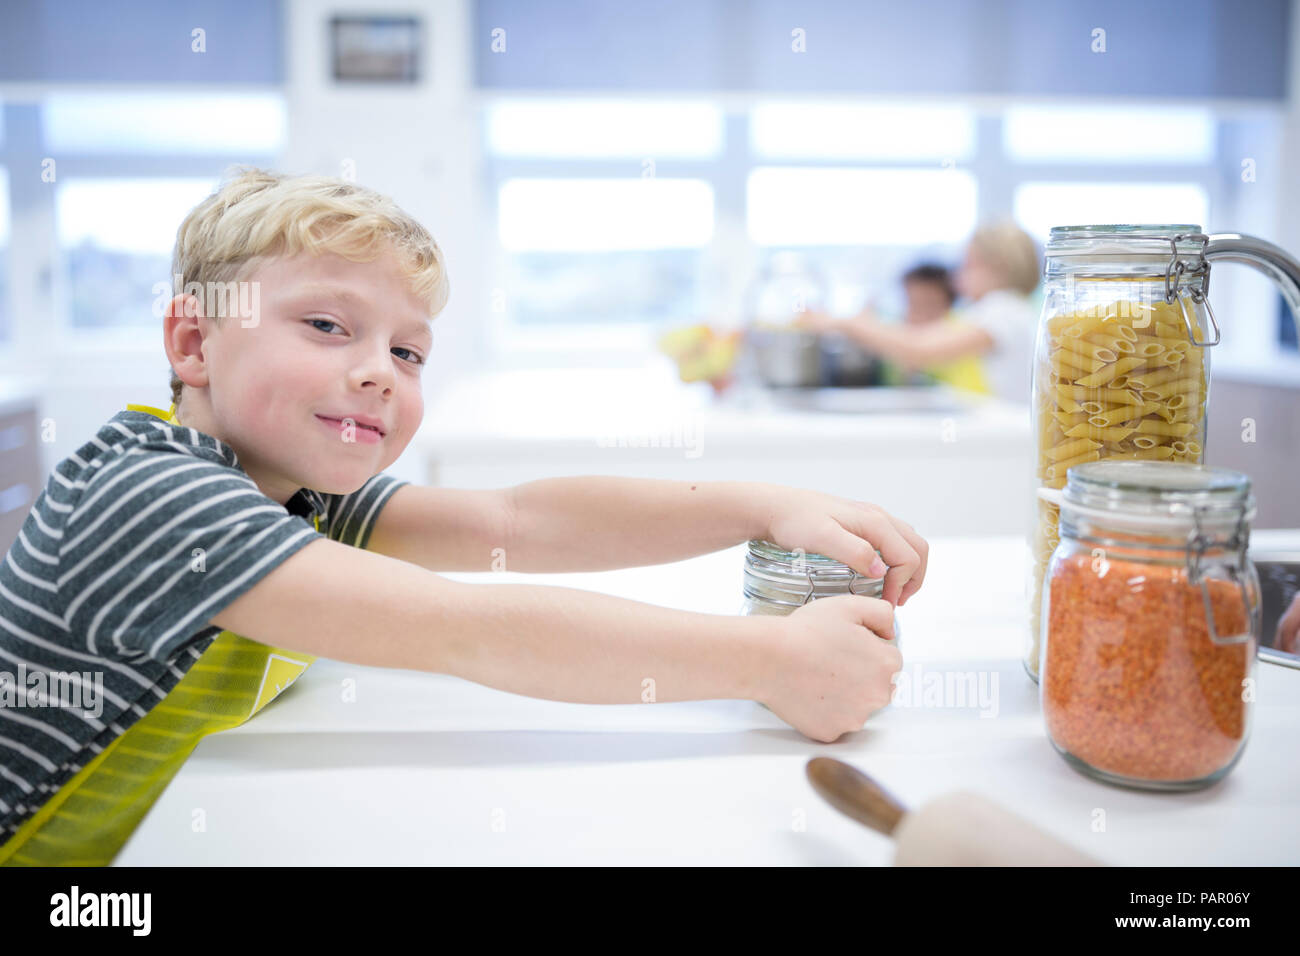 Portrait of smiling schoolboy in cooking class Stock Photo